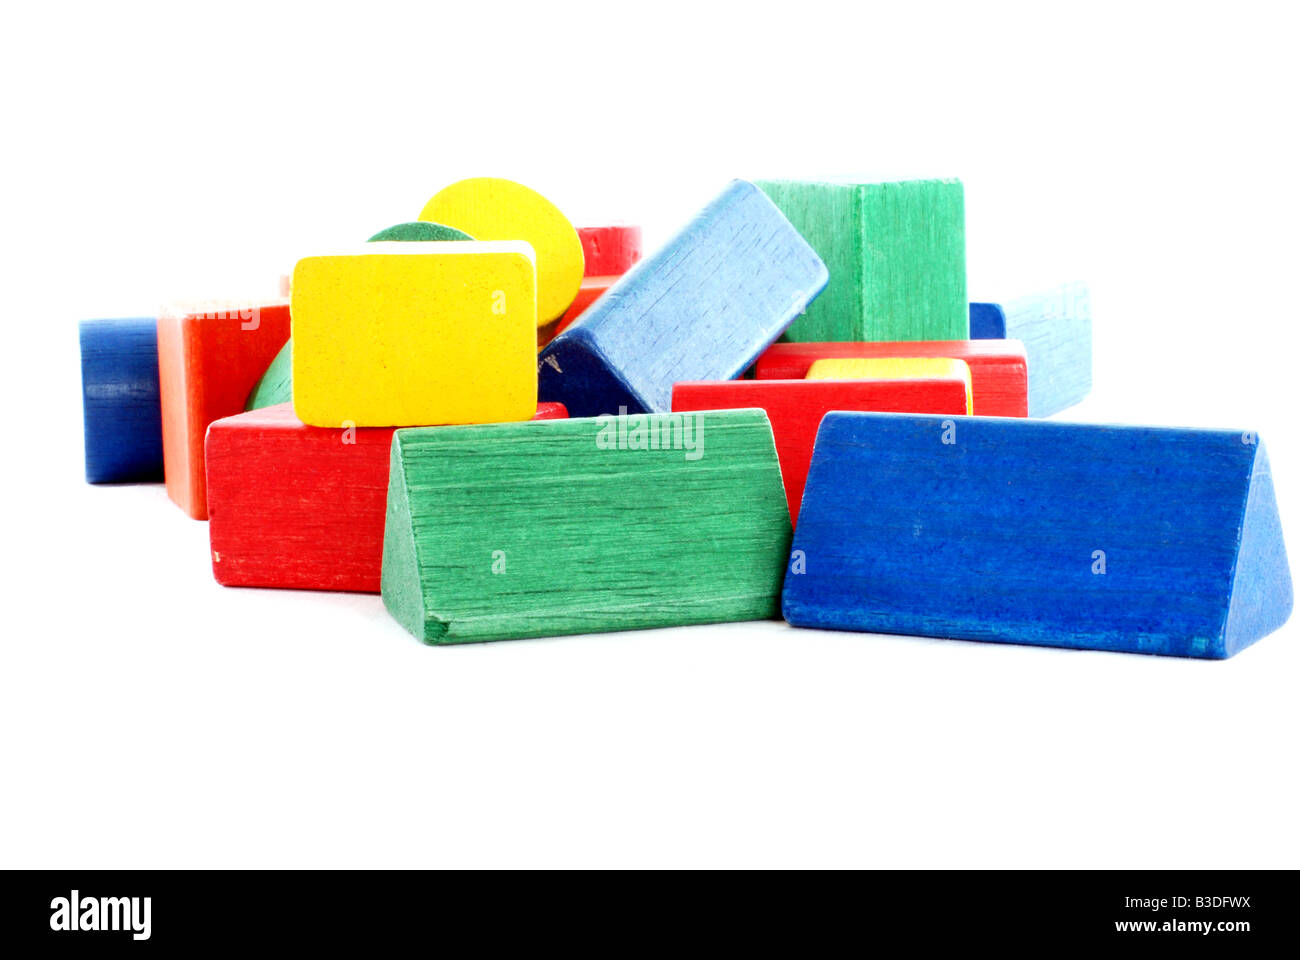 Building blocks, childrens, coloured shapes Stock Photo